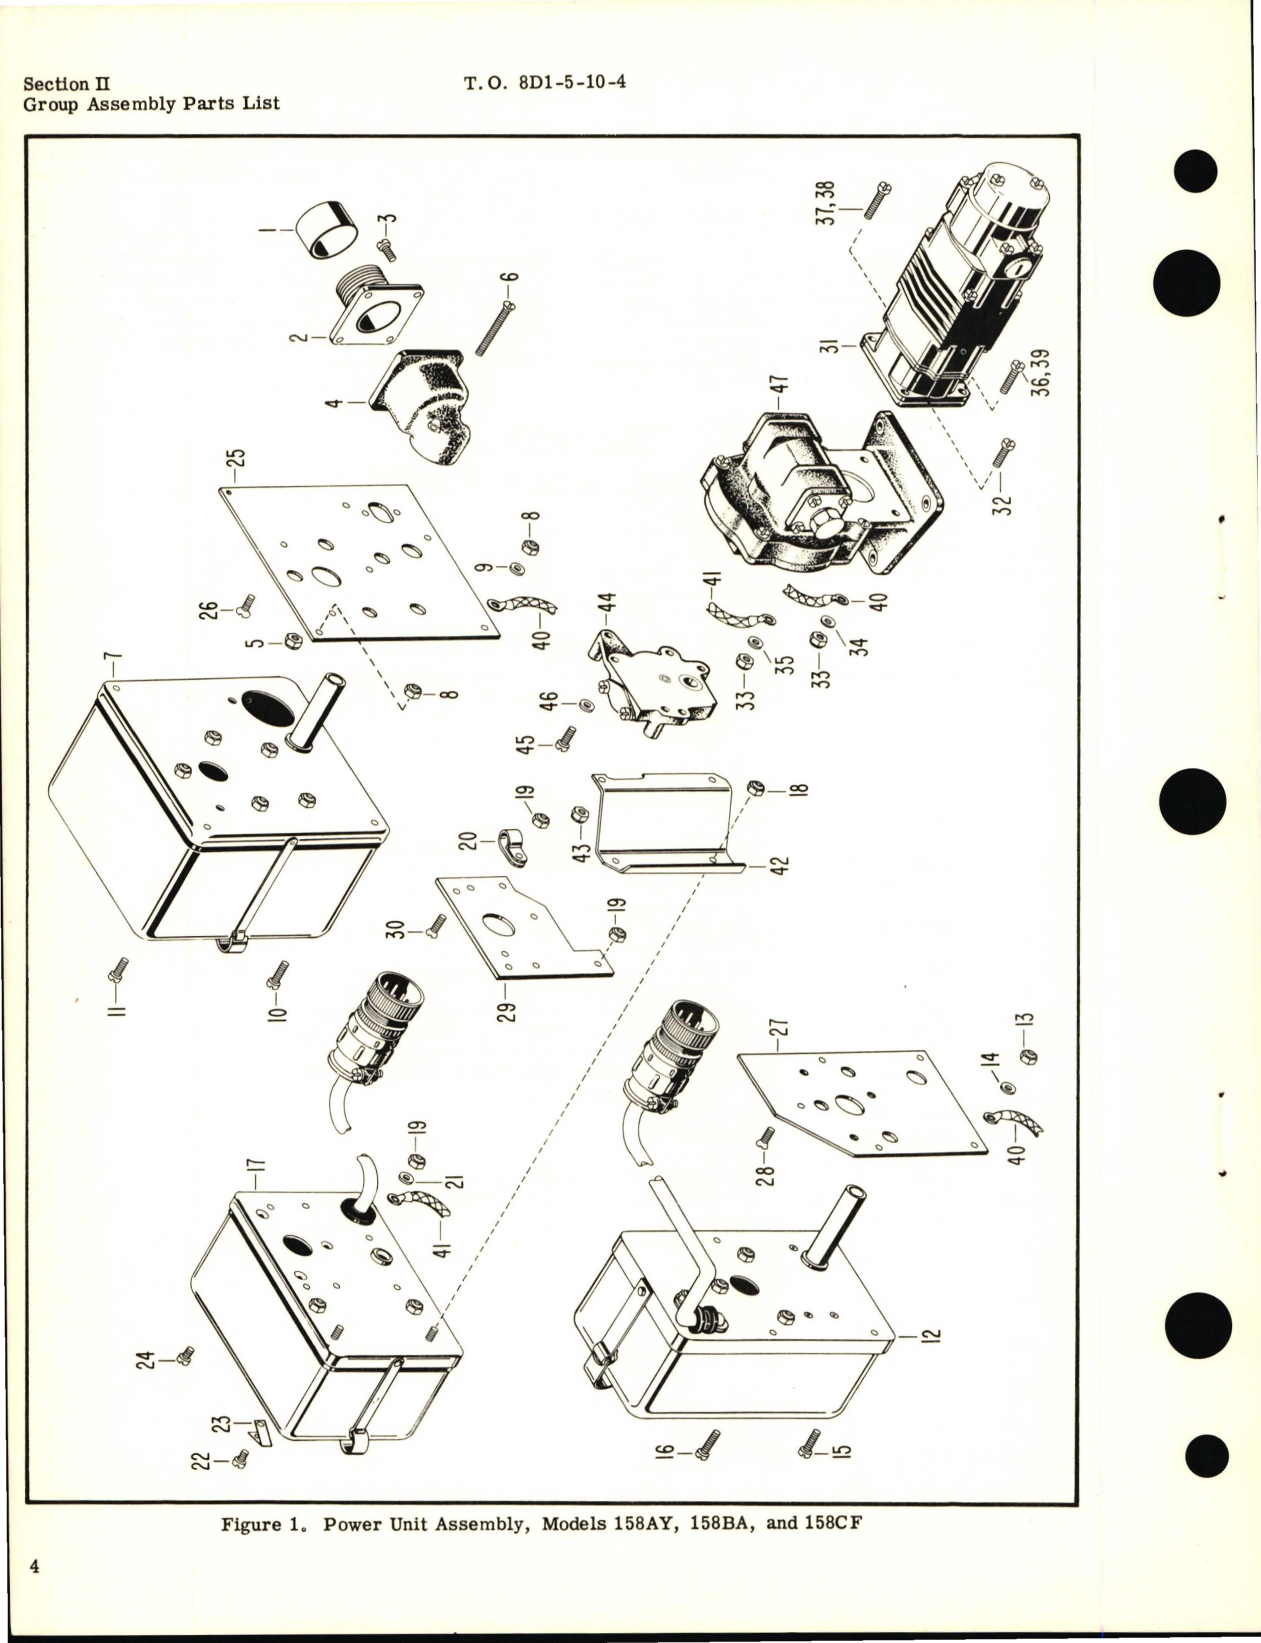 Sample page 6 from AirCorps Library document: Illustrated Parts Breakdown for Power Unit Assembly 158 Series